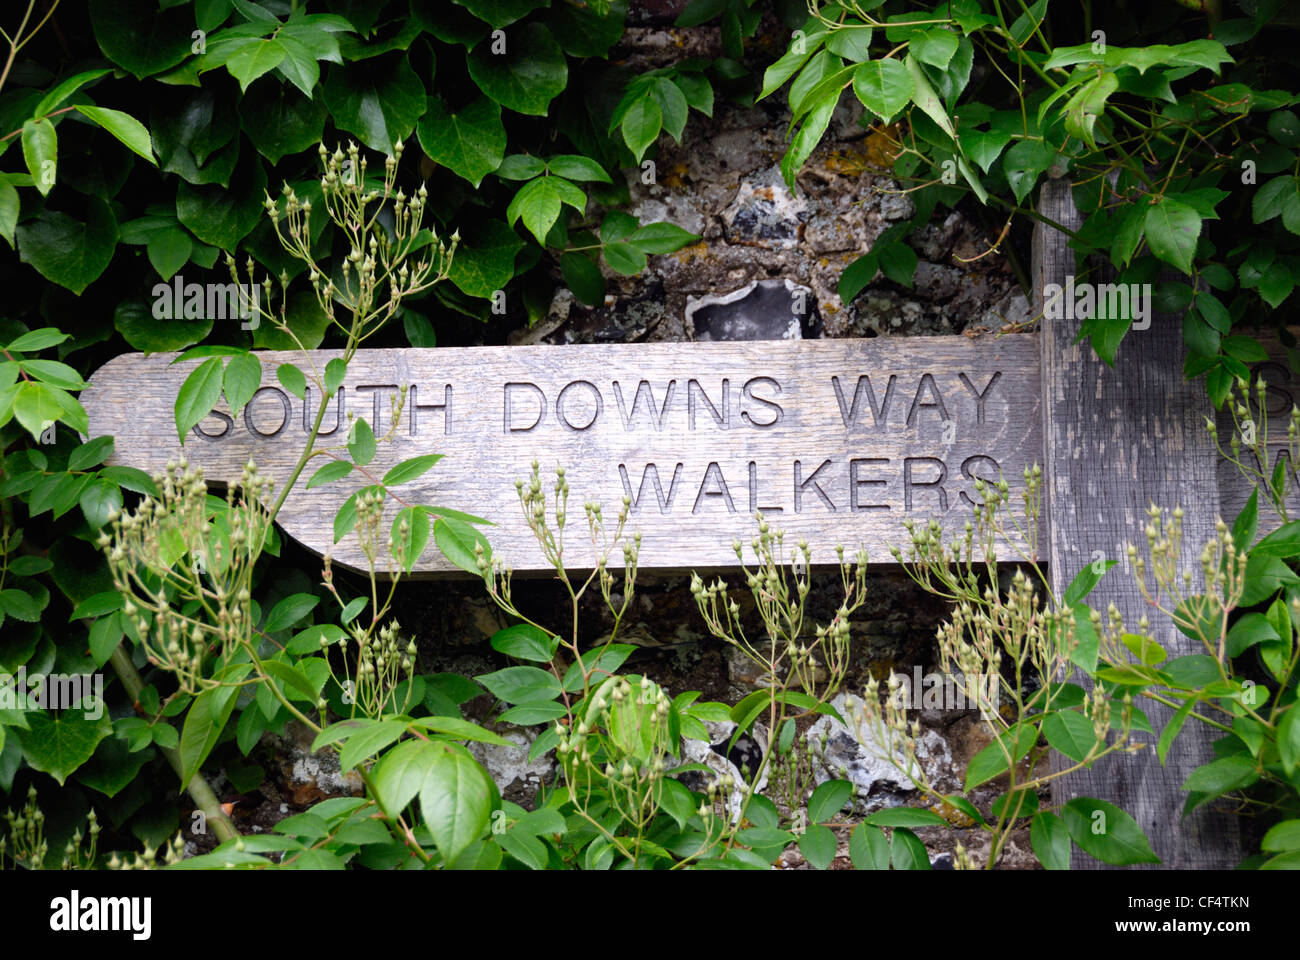 South Downs modo Walkers signpost. Foto Stock